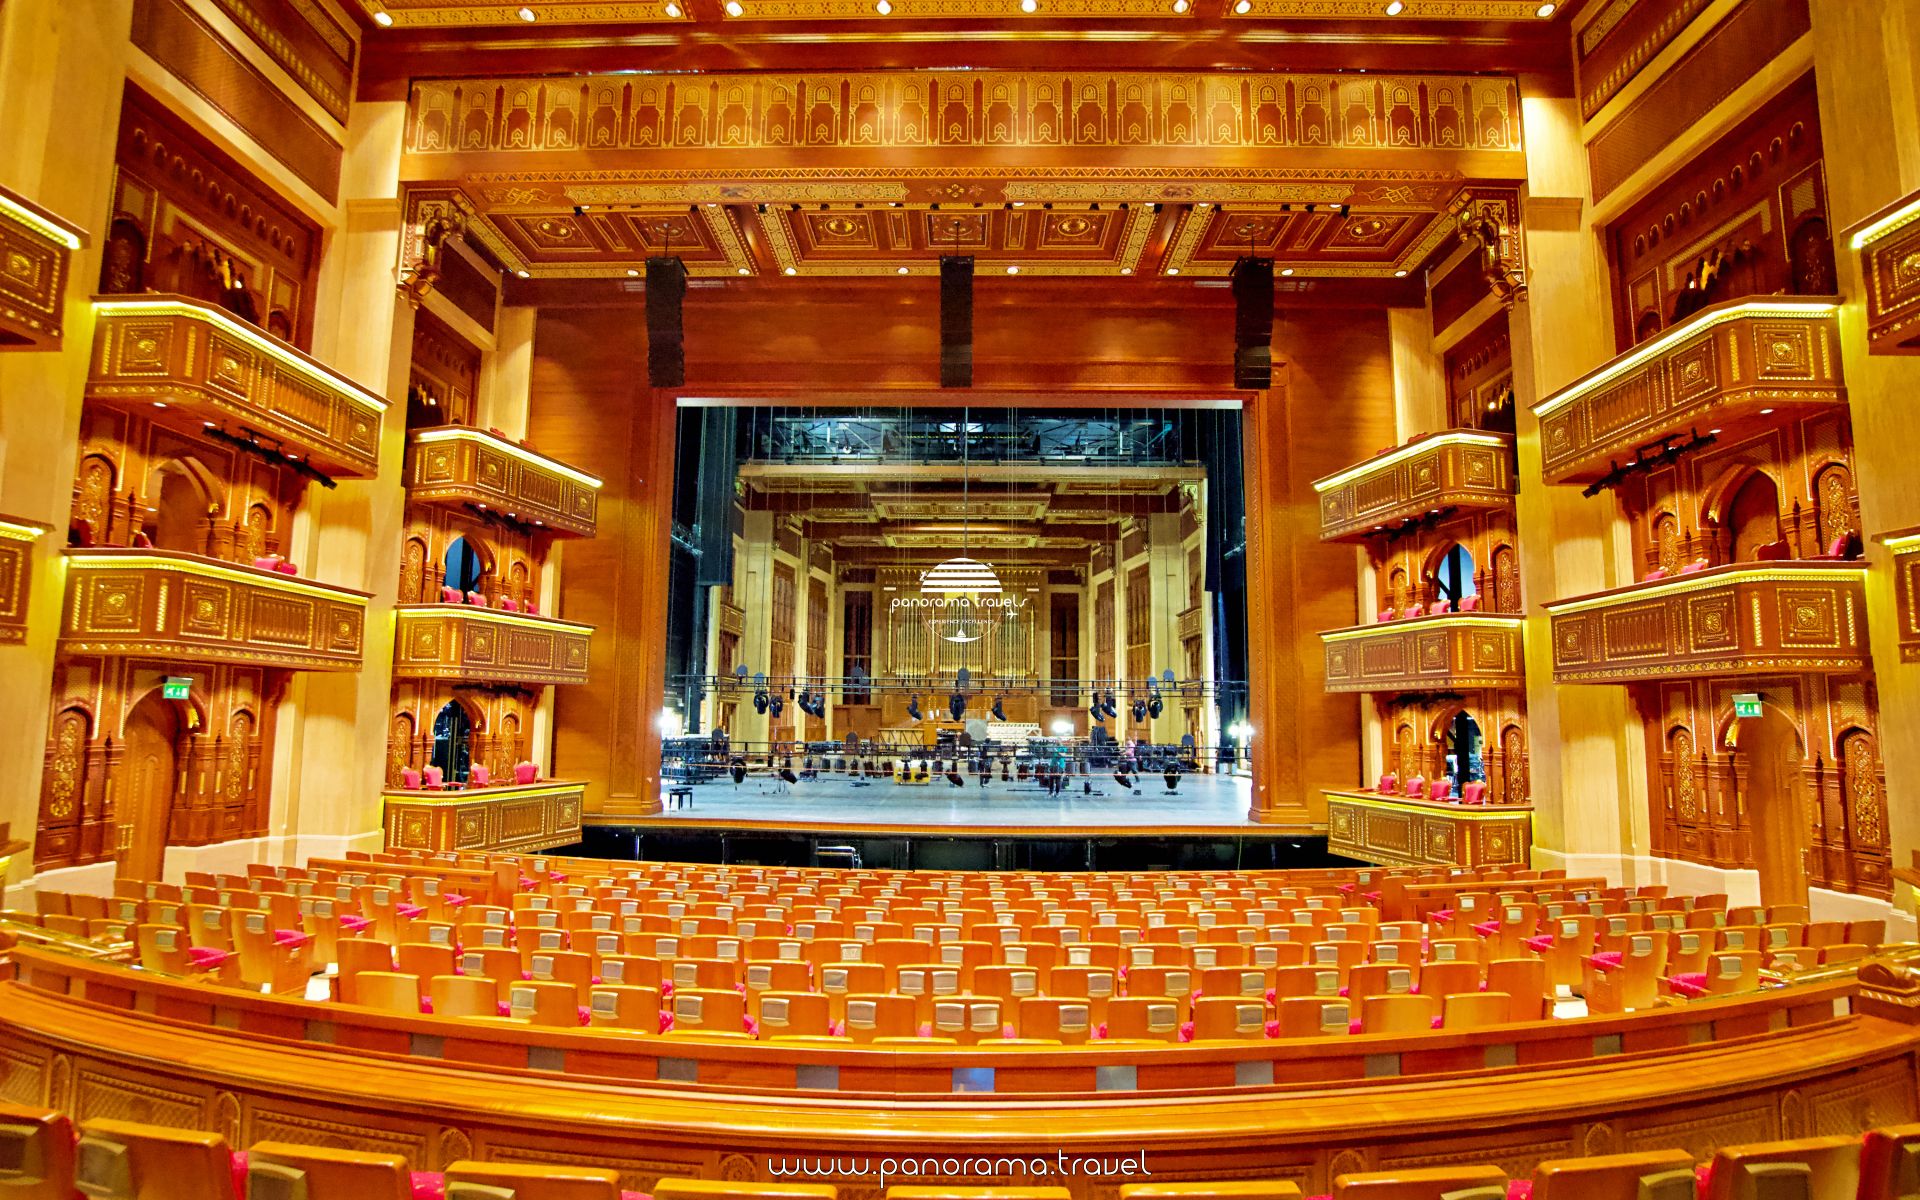 MUSCAT DAY TOUR ROYAL OPERA HOUSE INTERIOR